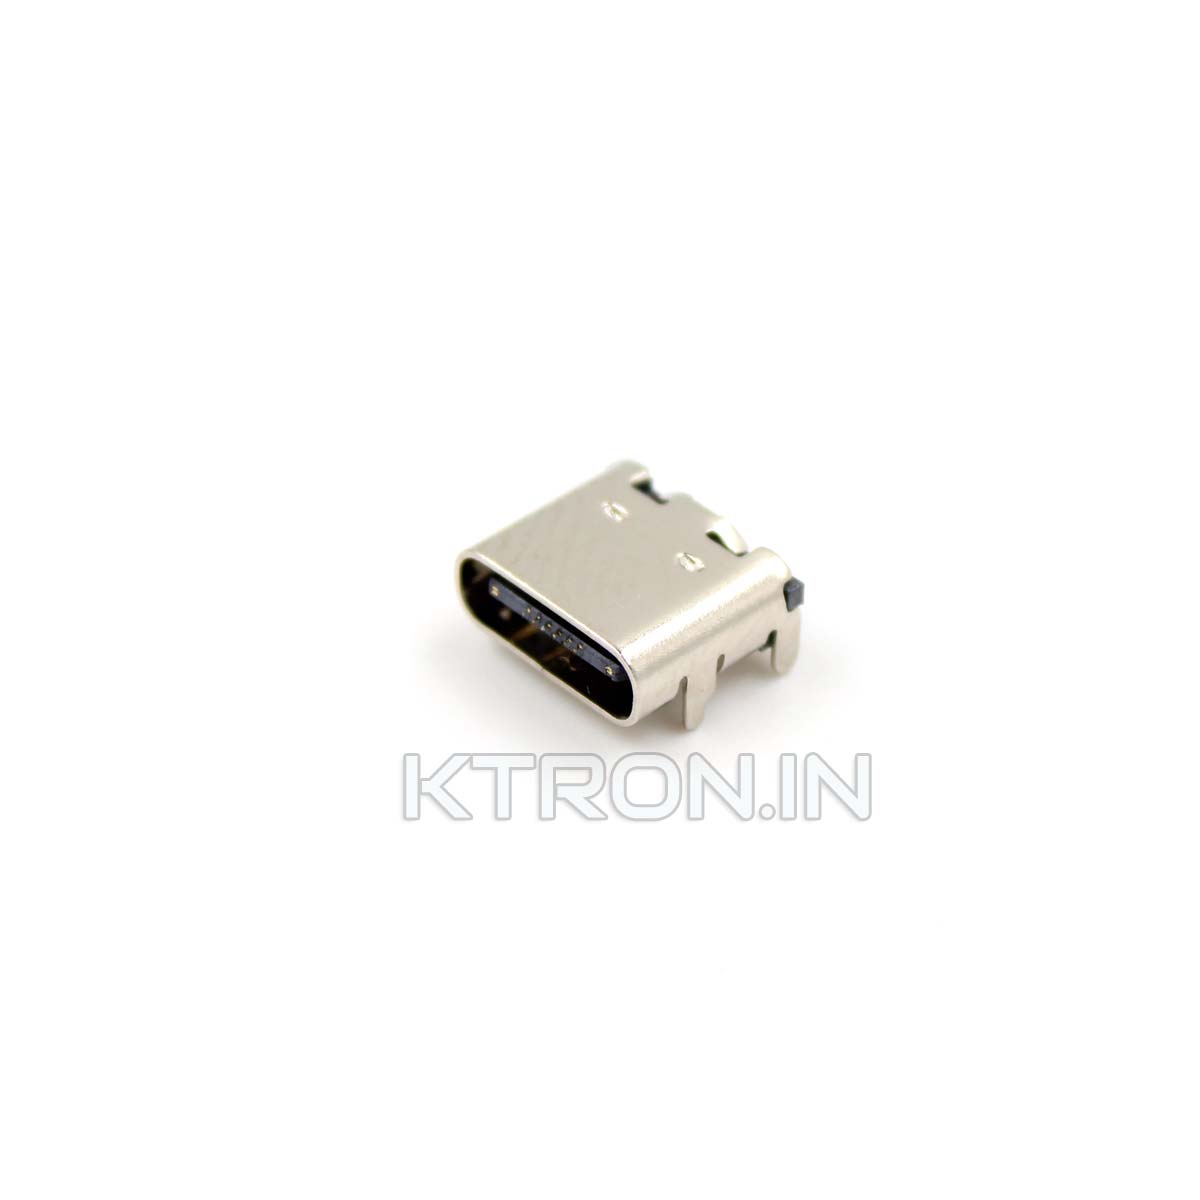 Buy 16 Pin USB Type C Connector - SMD - KTRON India